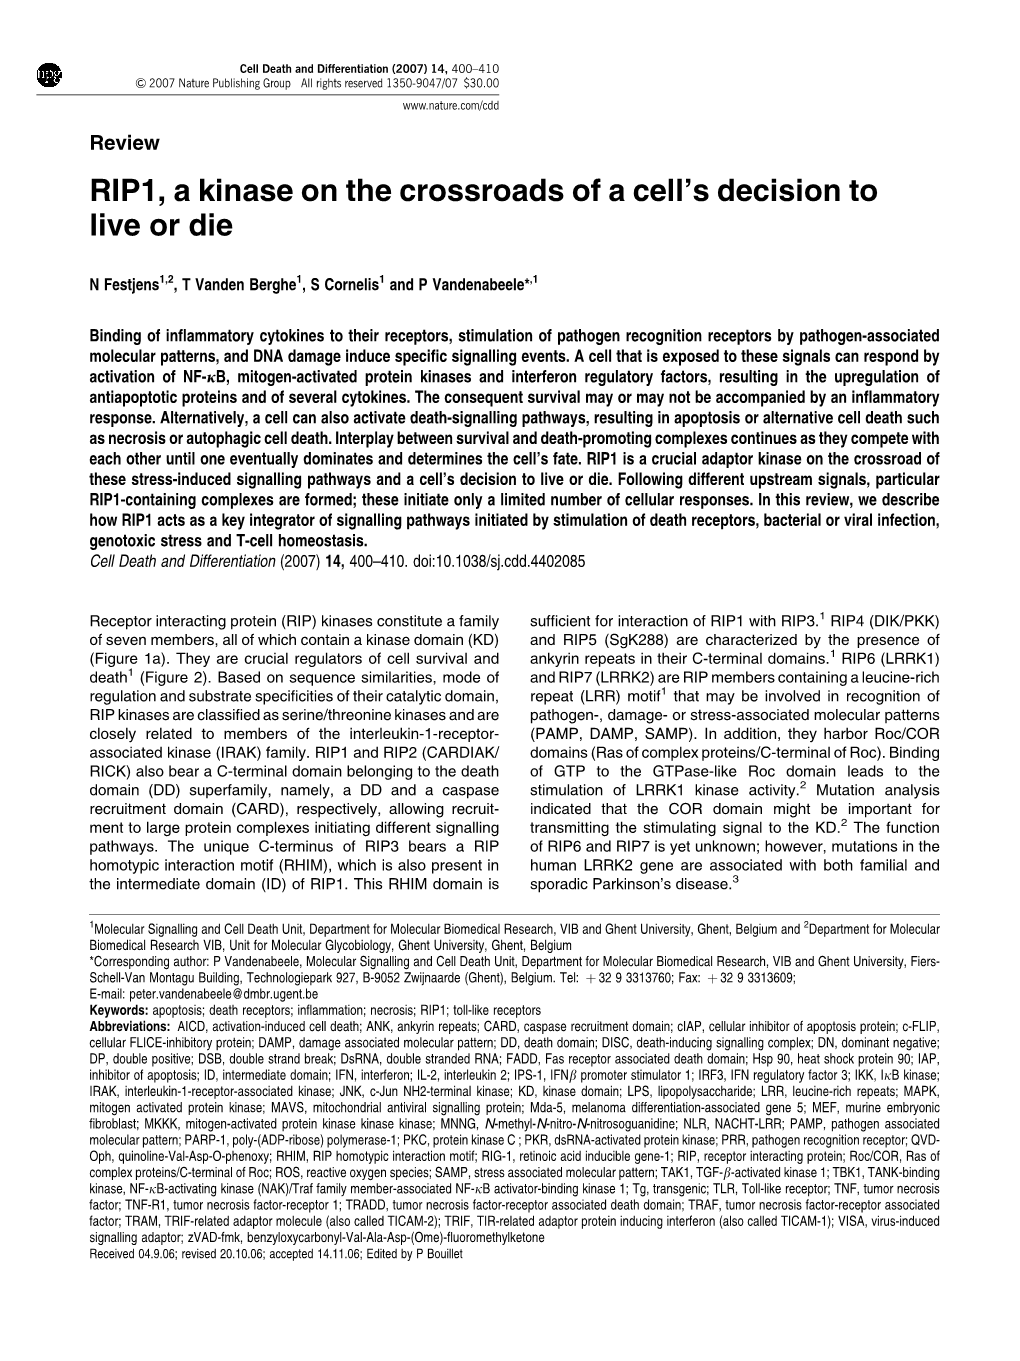 RIP1, a Kinase on the Crossroads of a Cell's Decision to Live Or